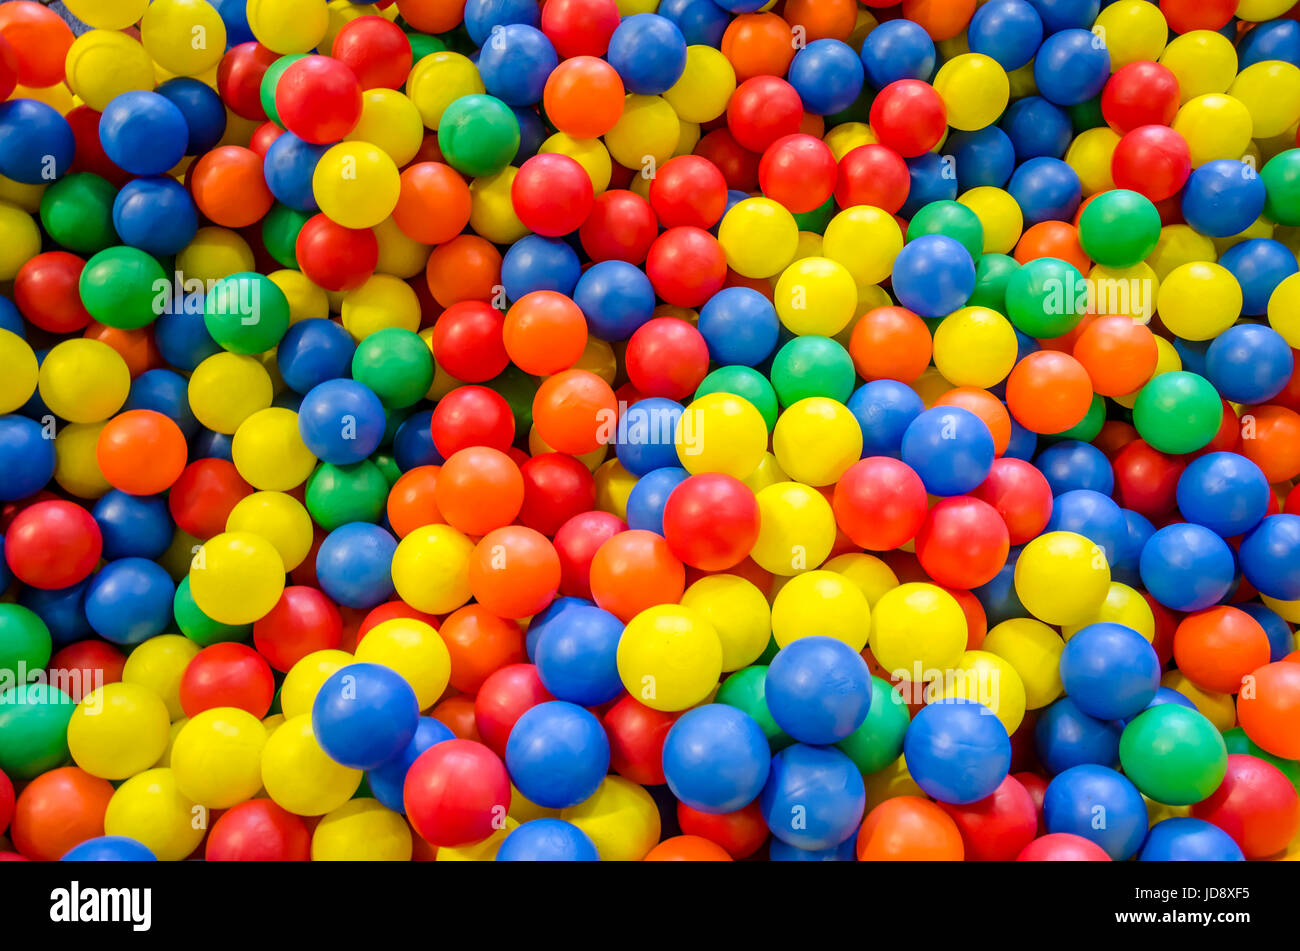 Childrens Balls High Resolution Stock Photography and Images   Alamy